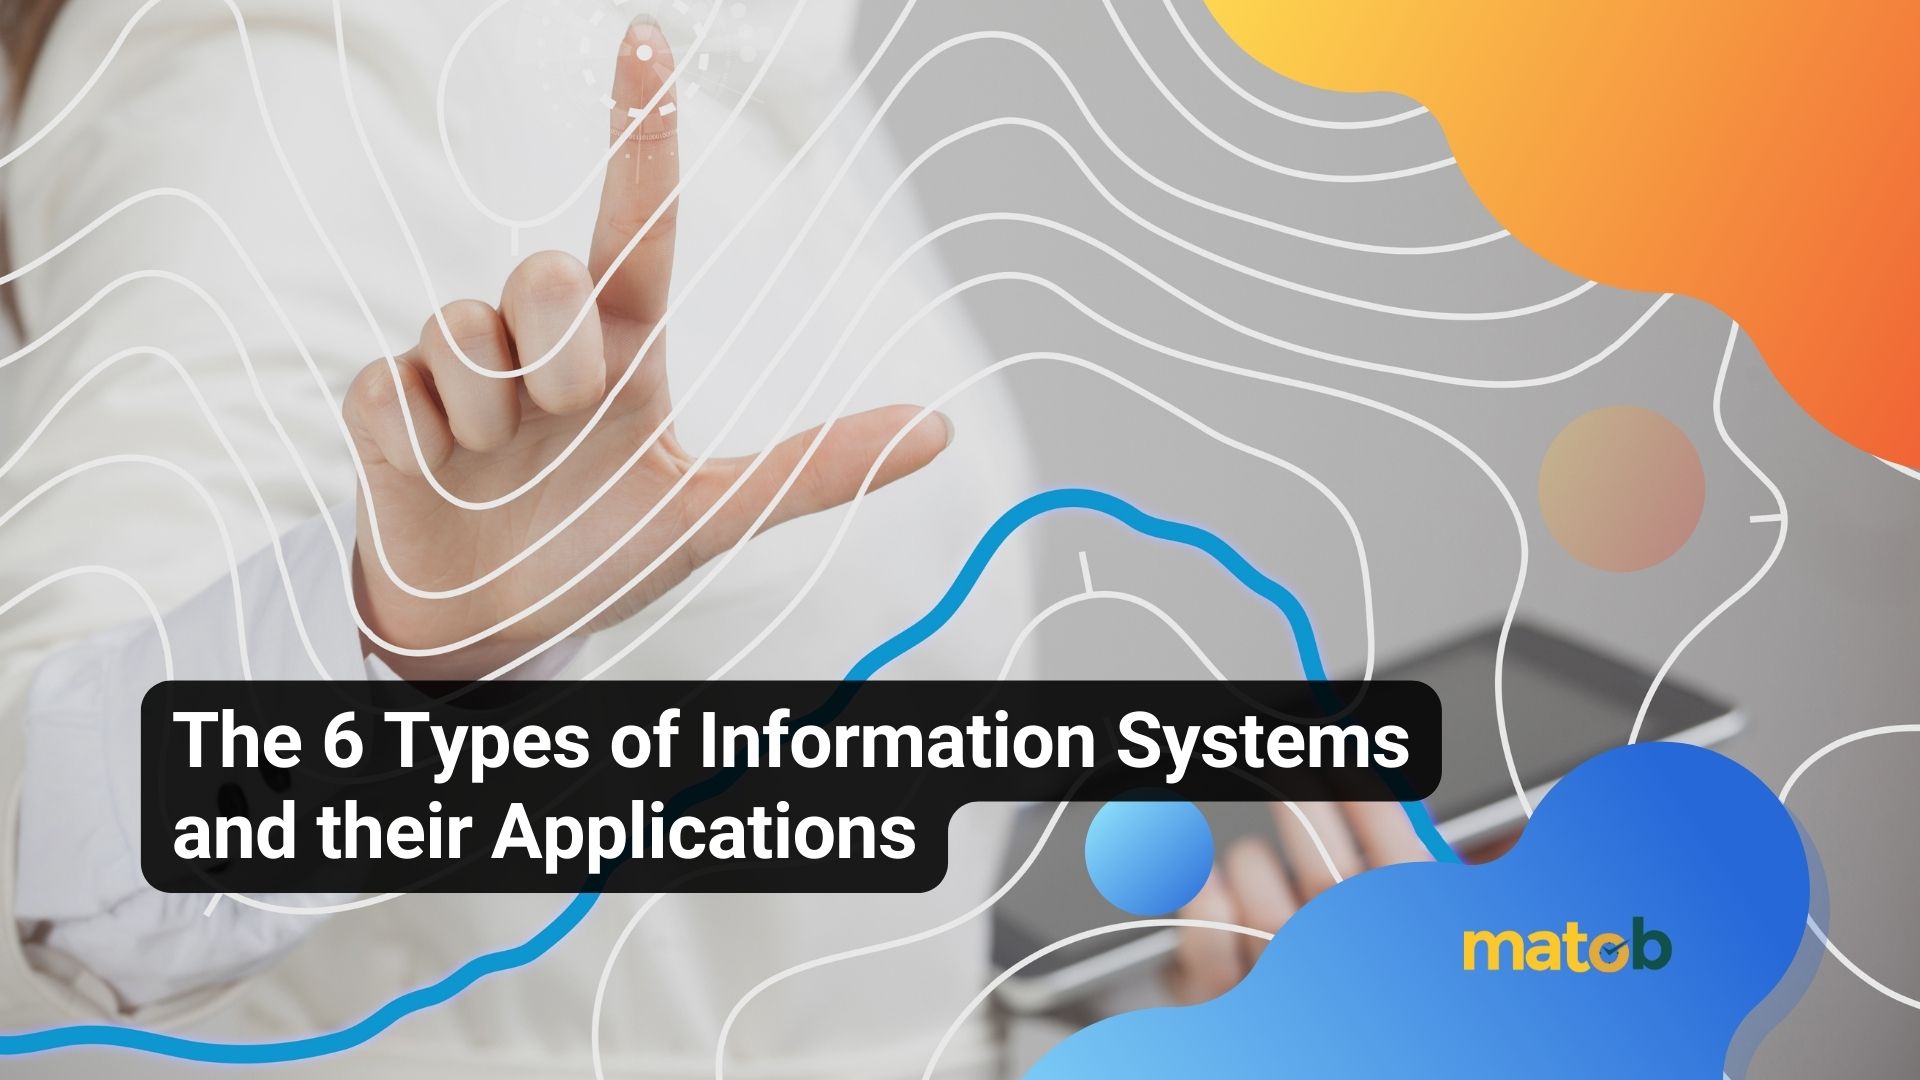 The 6 Types of Information Systems and their Applications